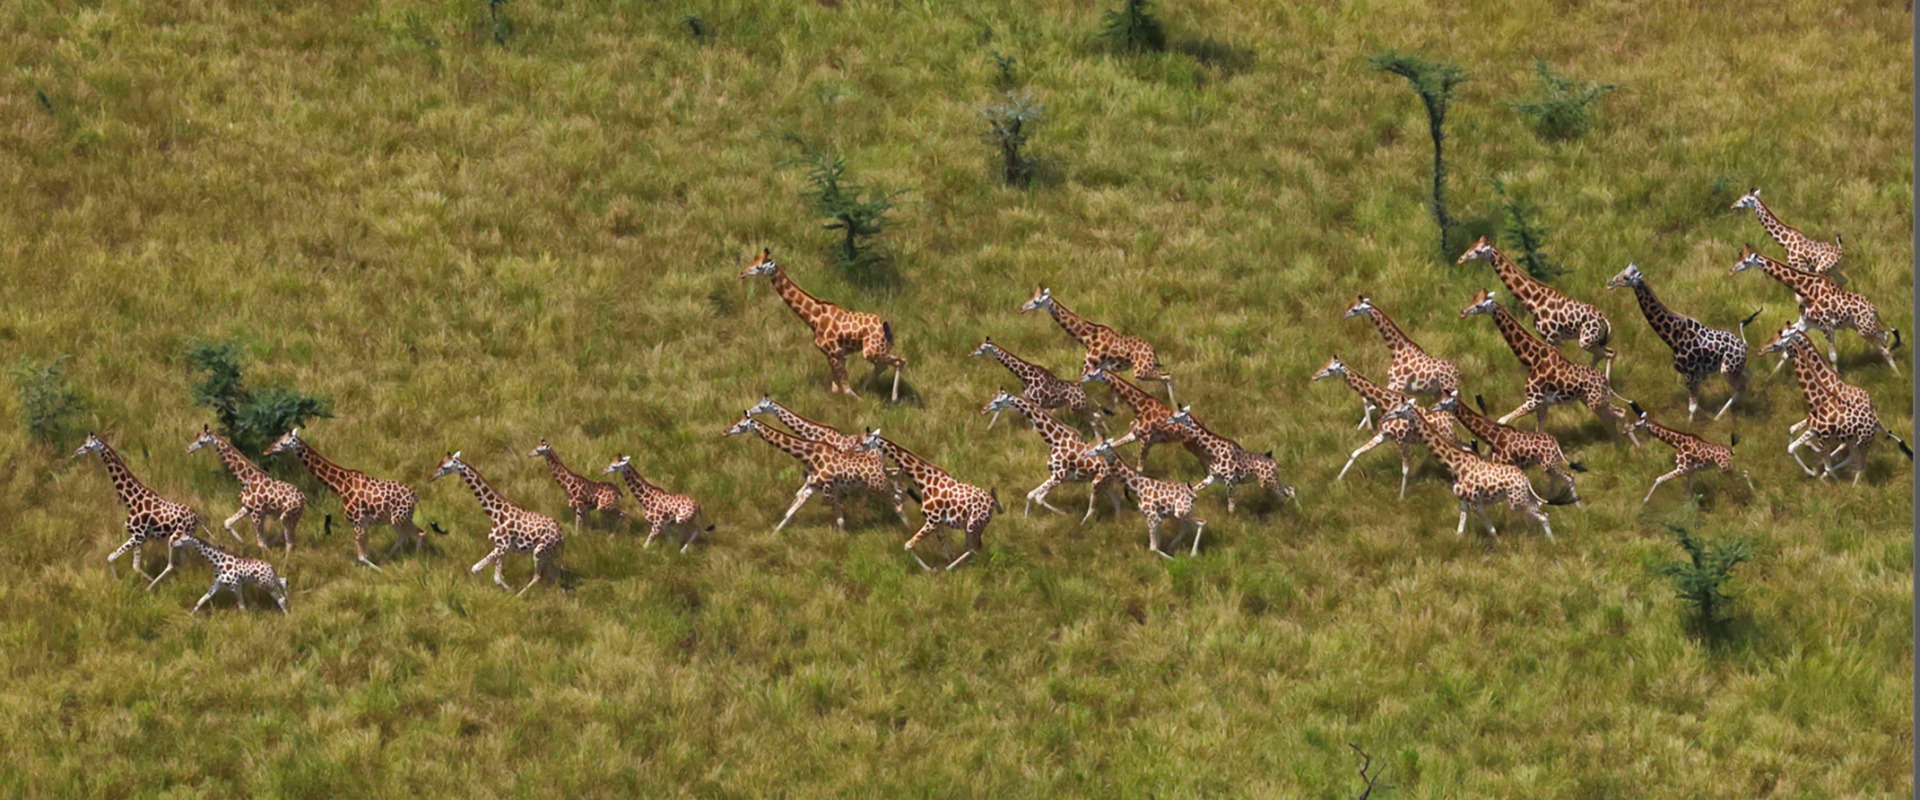 Herd of Giraffe in South Sudan, courtesy of African Parks/© Mike Fay